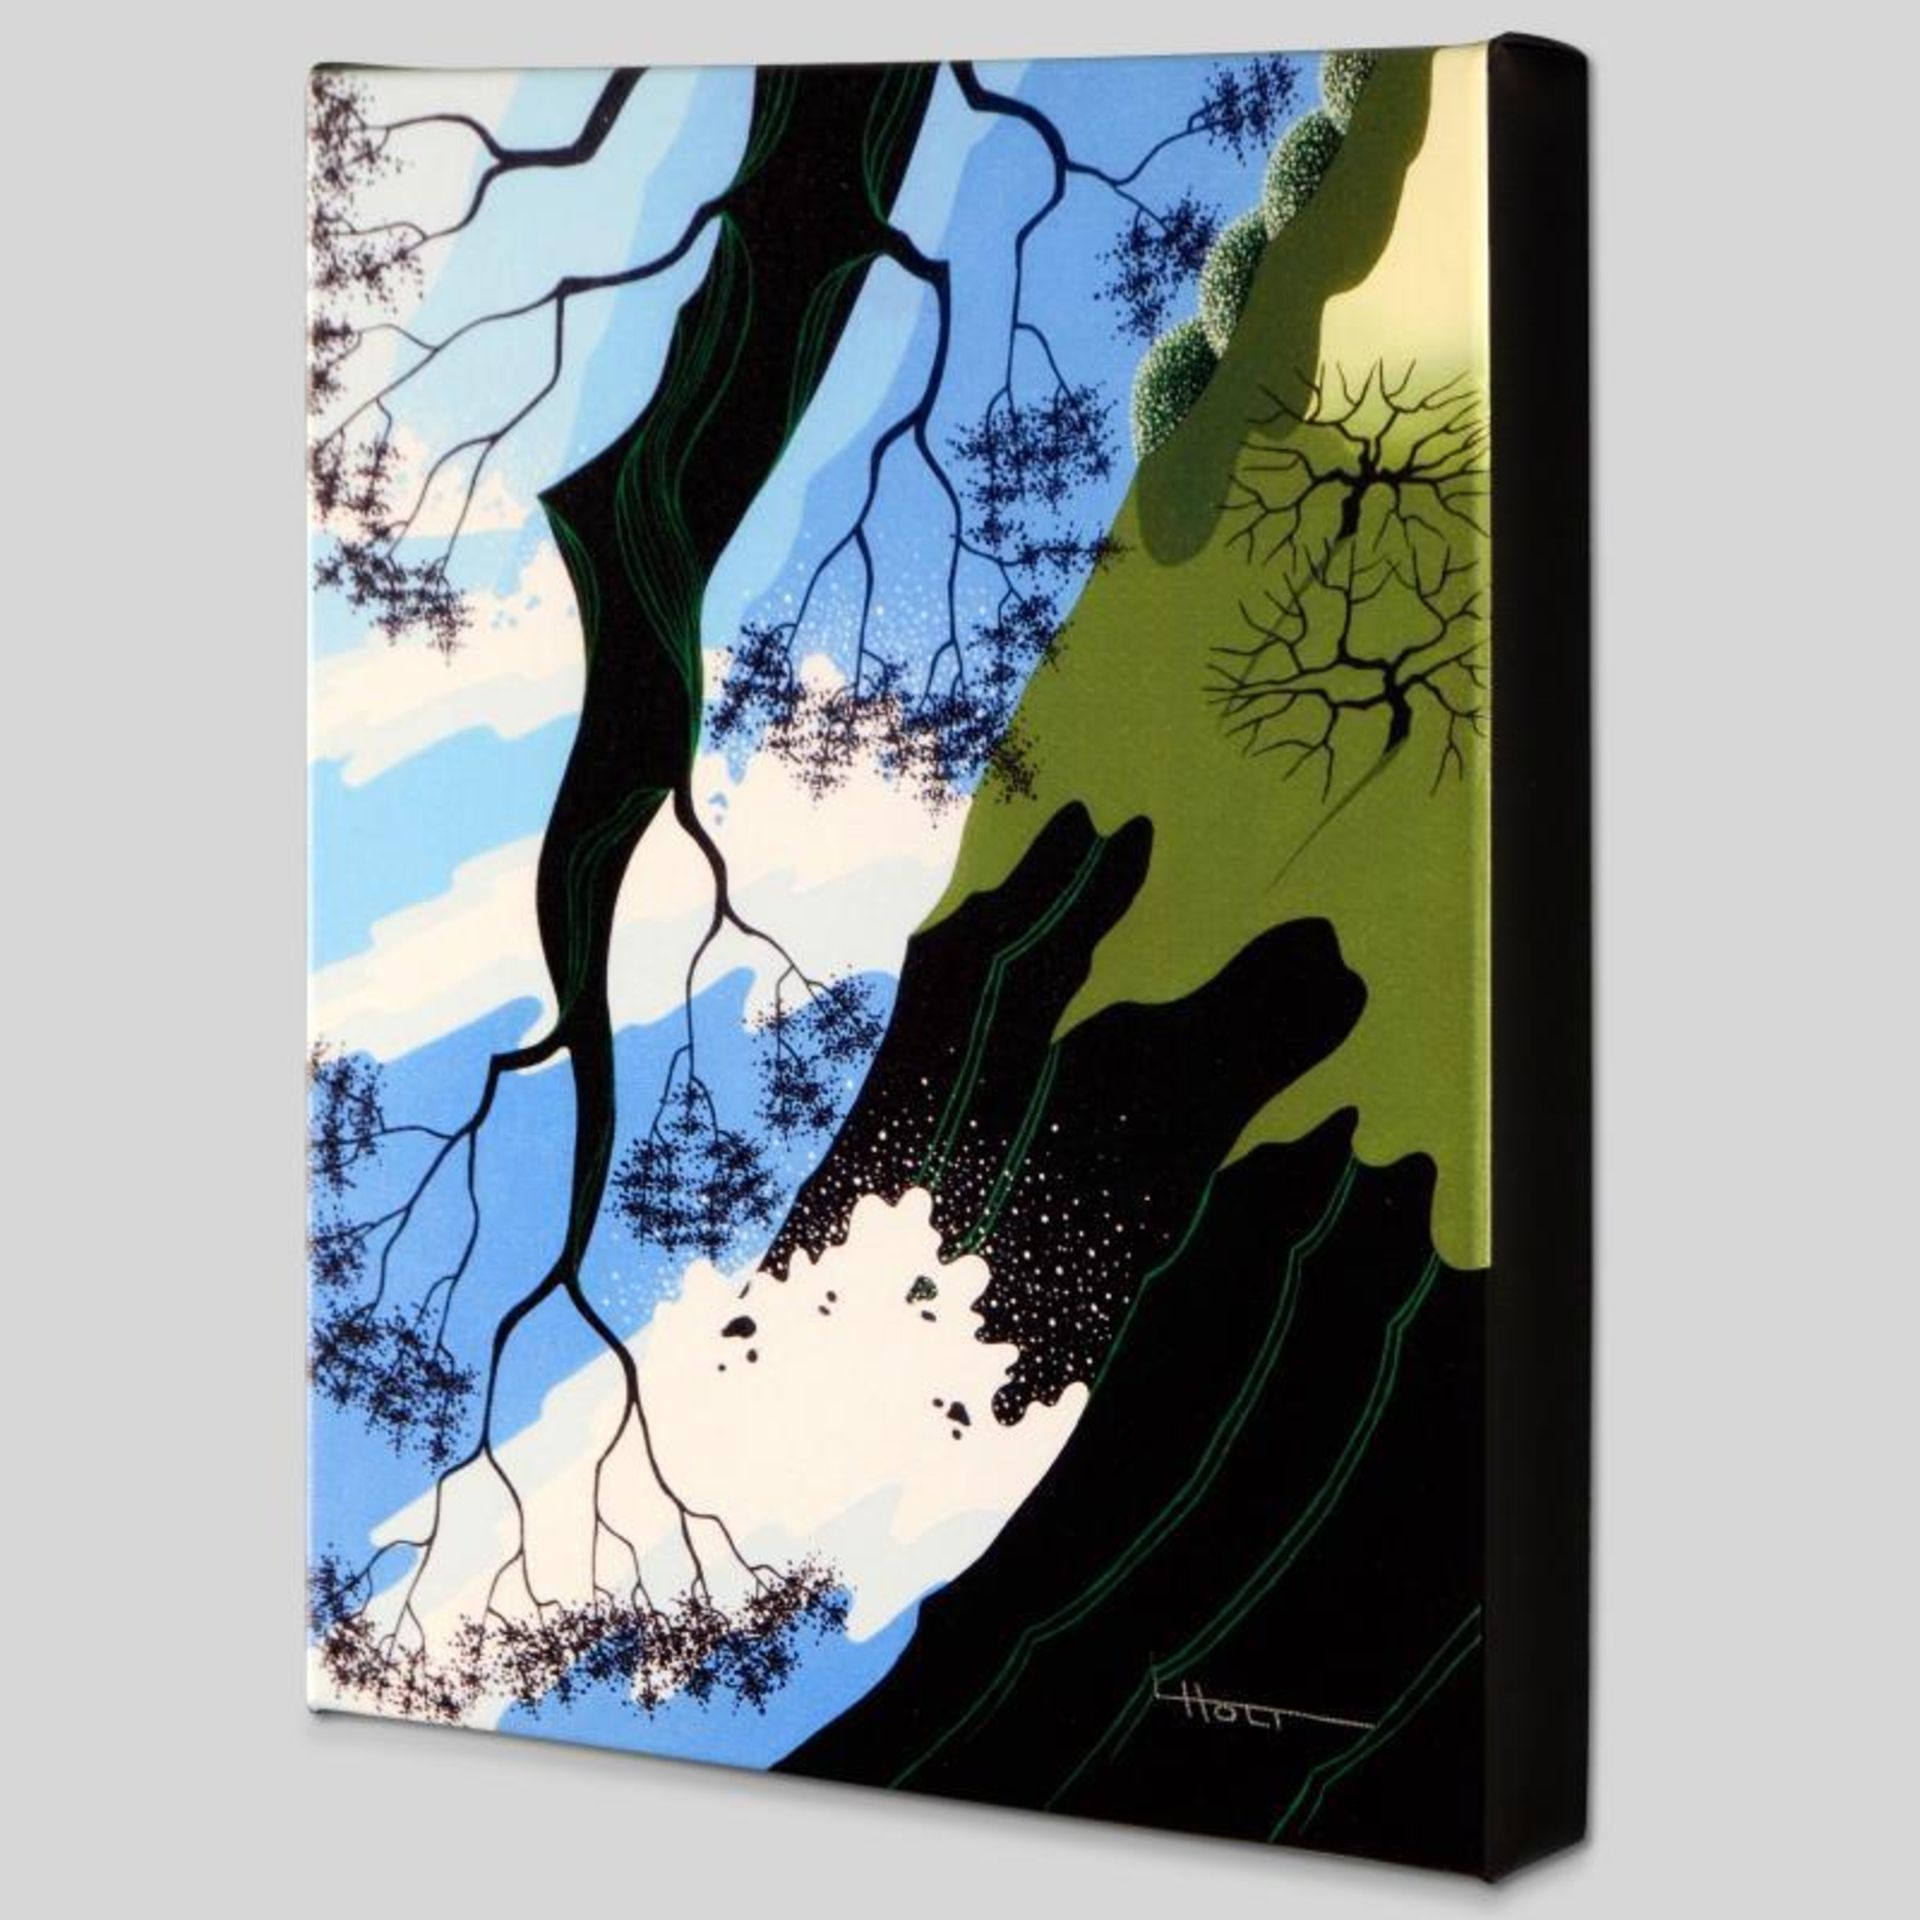 "Unspoiled" Limited Edition Giclee on Canvas by Larissa Holt, Numbered and Signe - Image 2 of 2